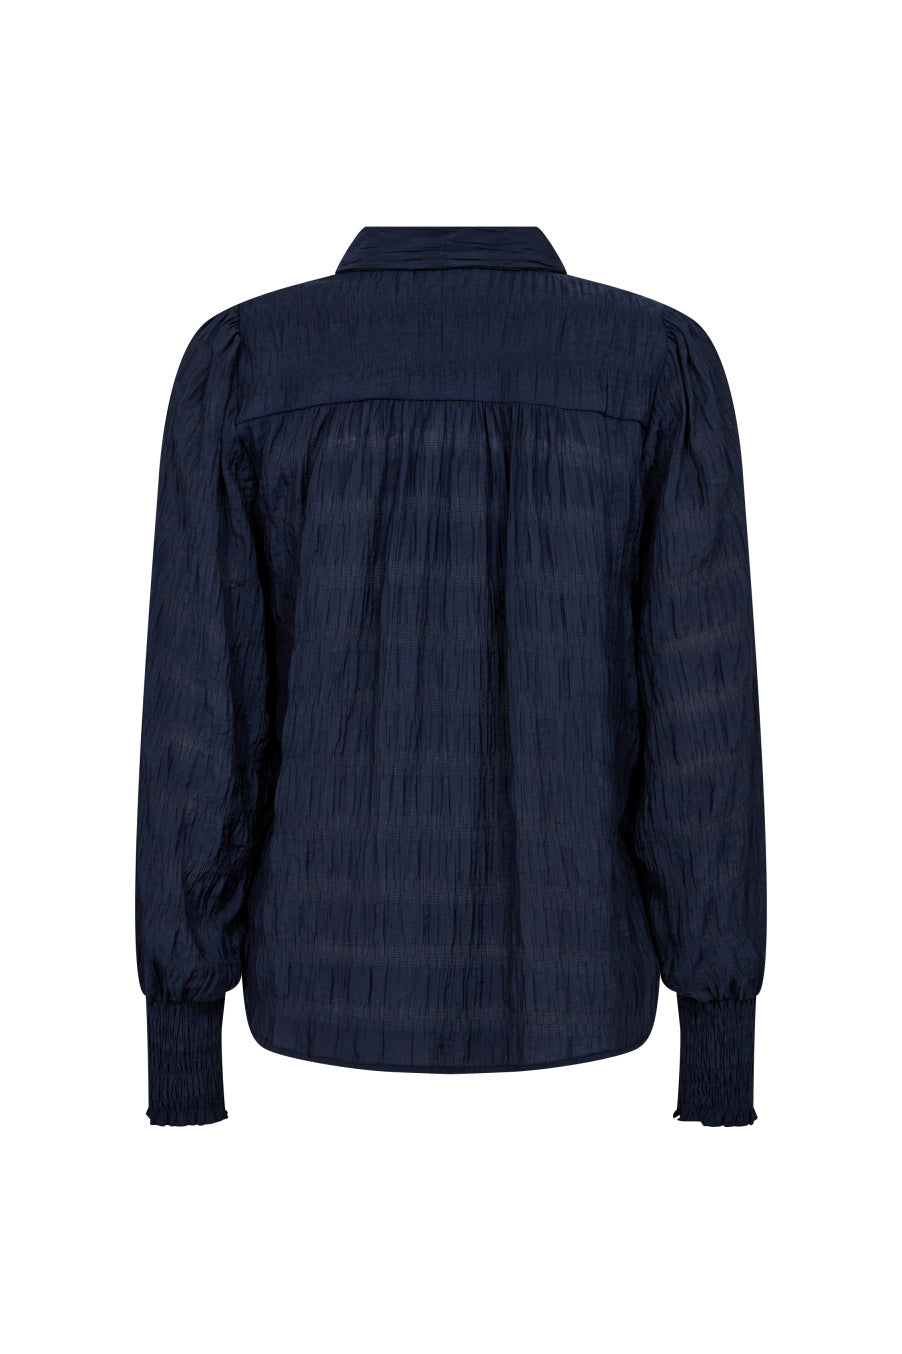 Co'Couture Structure Line Frill Blouse - Navy - RUM Amsterdam